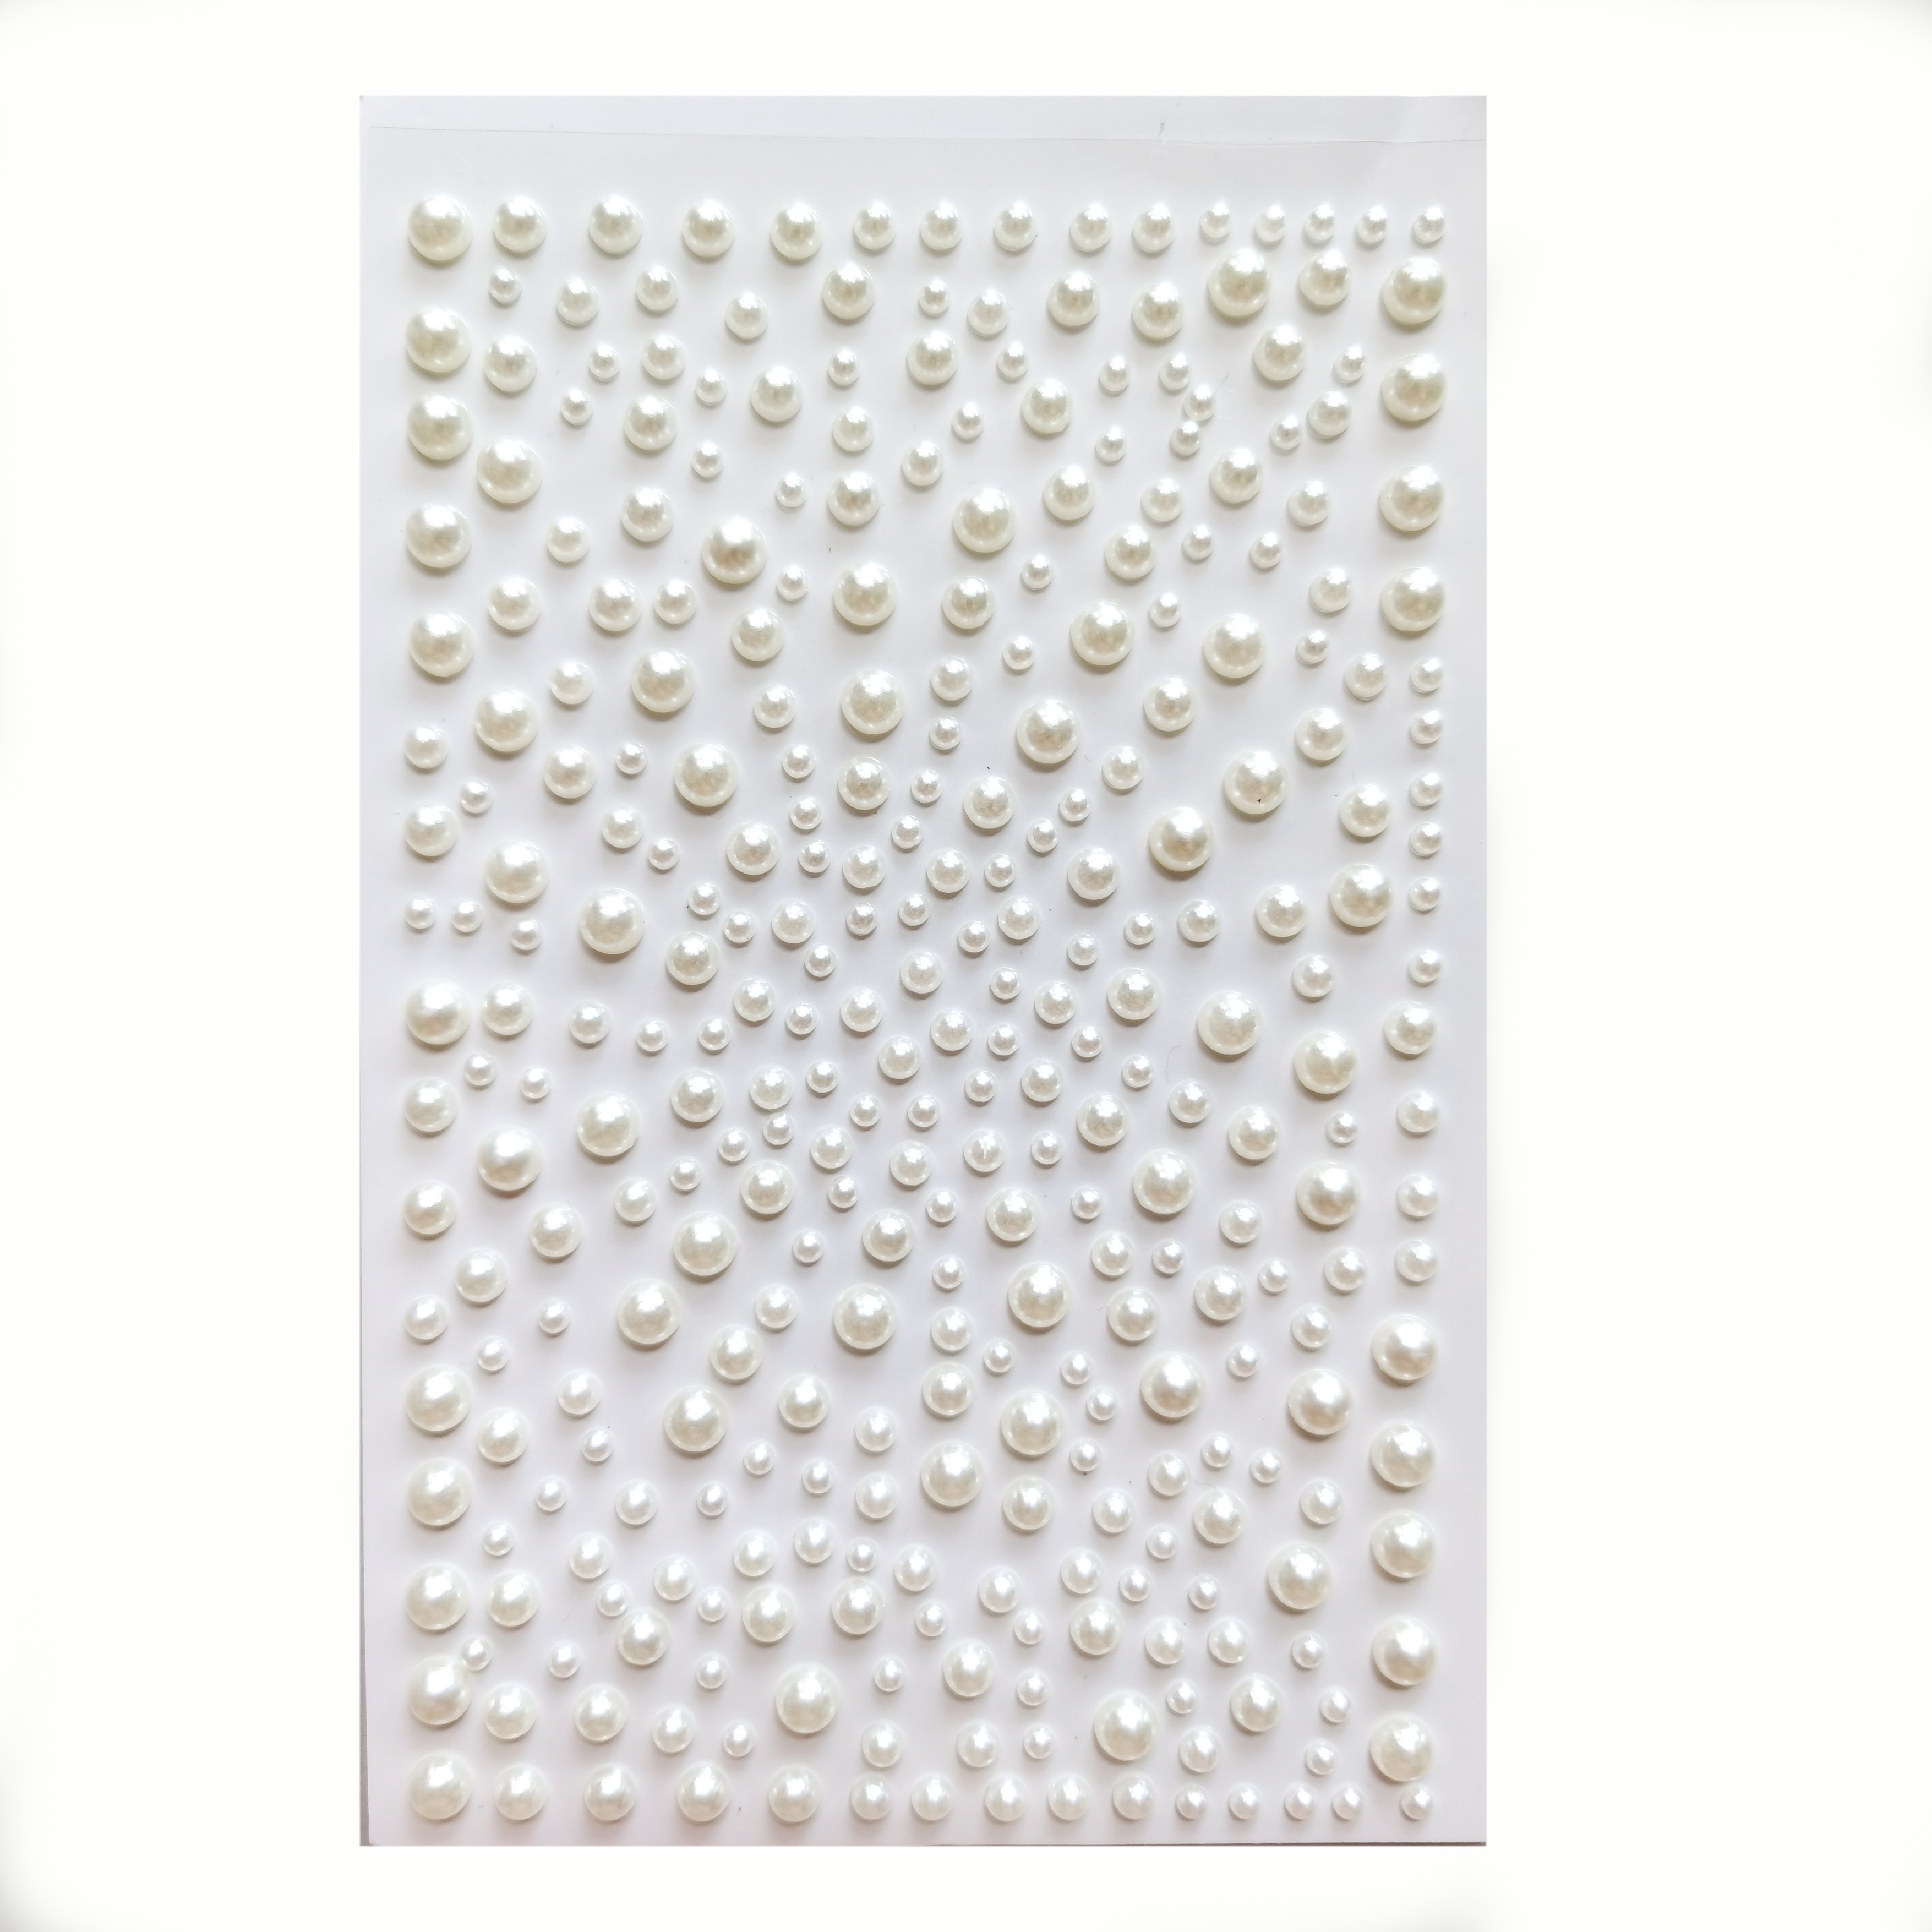 Self Adhesive Pearl Stickers, White Flat Back Pearls Sticker For Face  Beauty Makeup Nail Art Cell Phone DIY Crafts Home Decor Scrapbooking  Embellishme